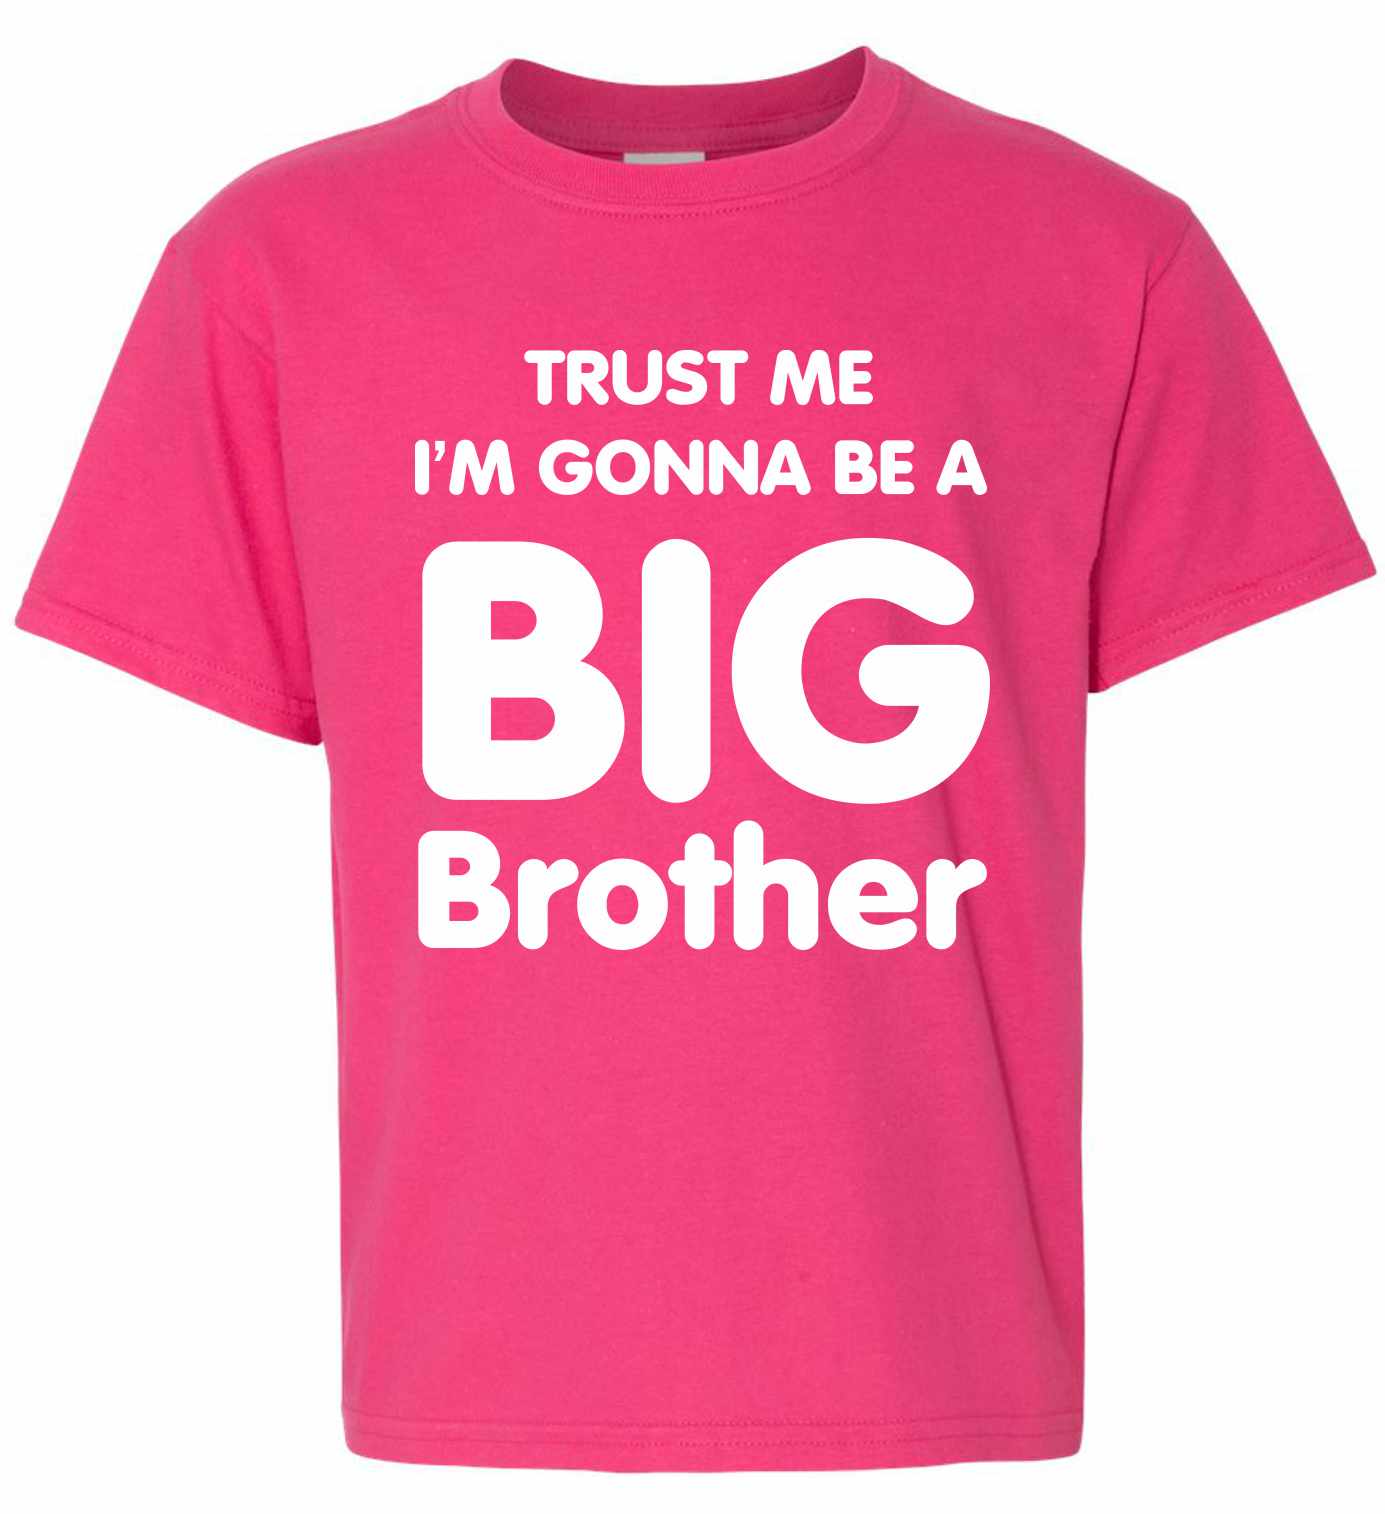 Trust Me I'm Gonna be a Big Brother on Kids T-Shirt